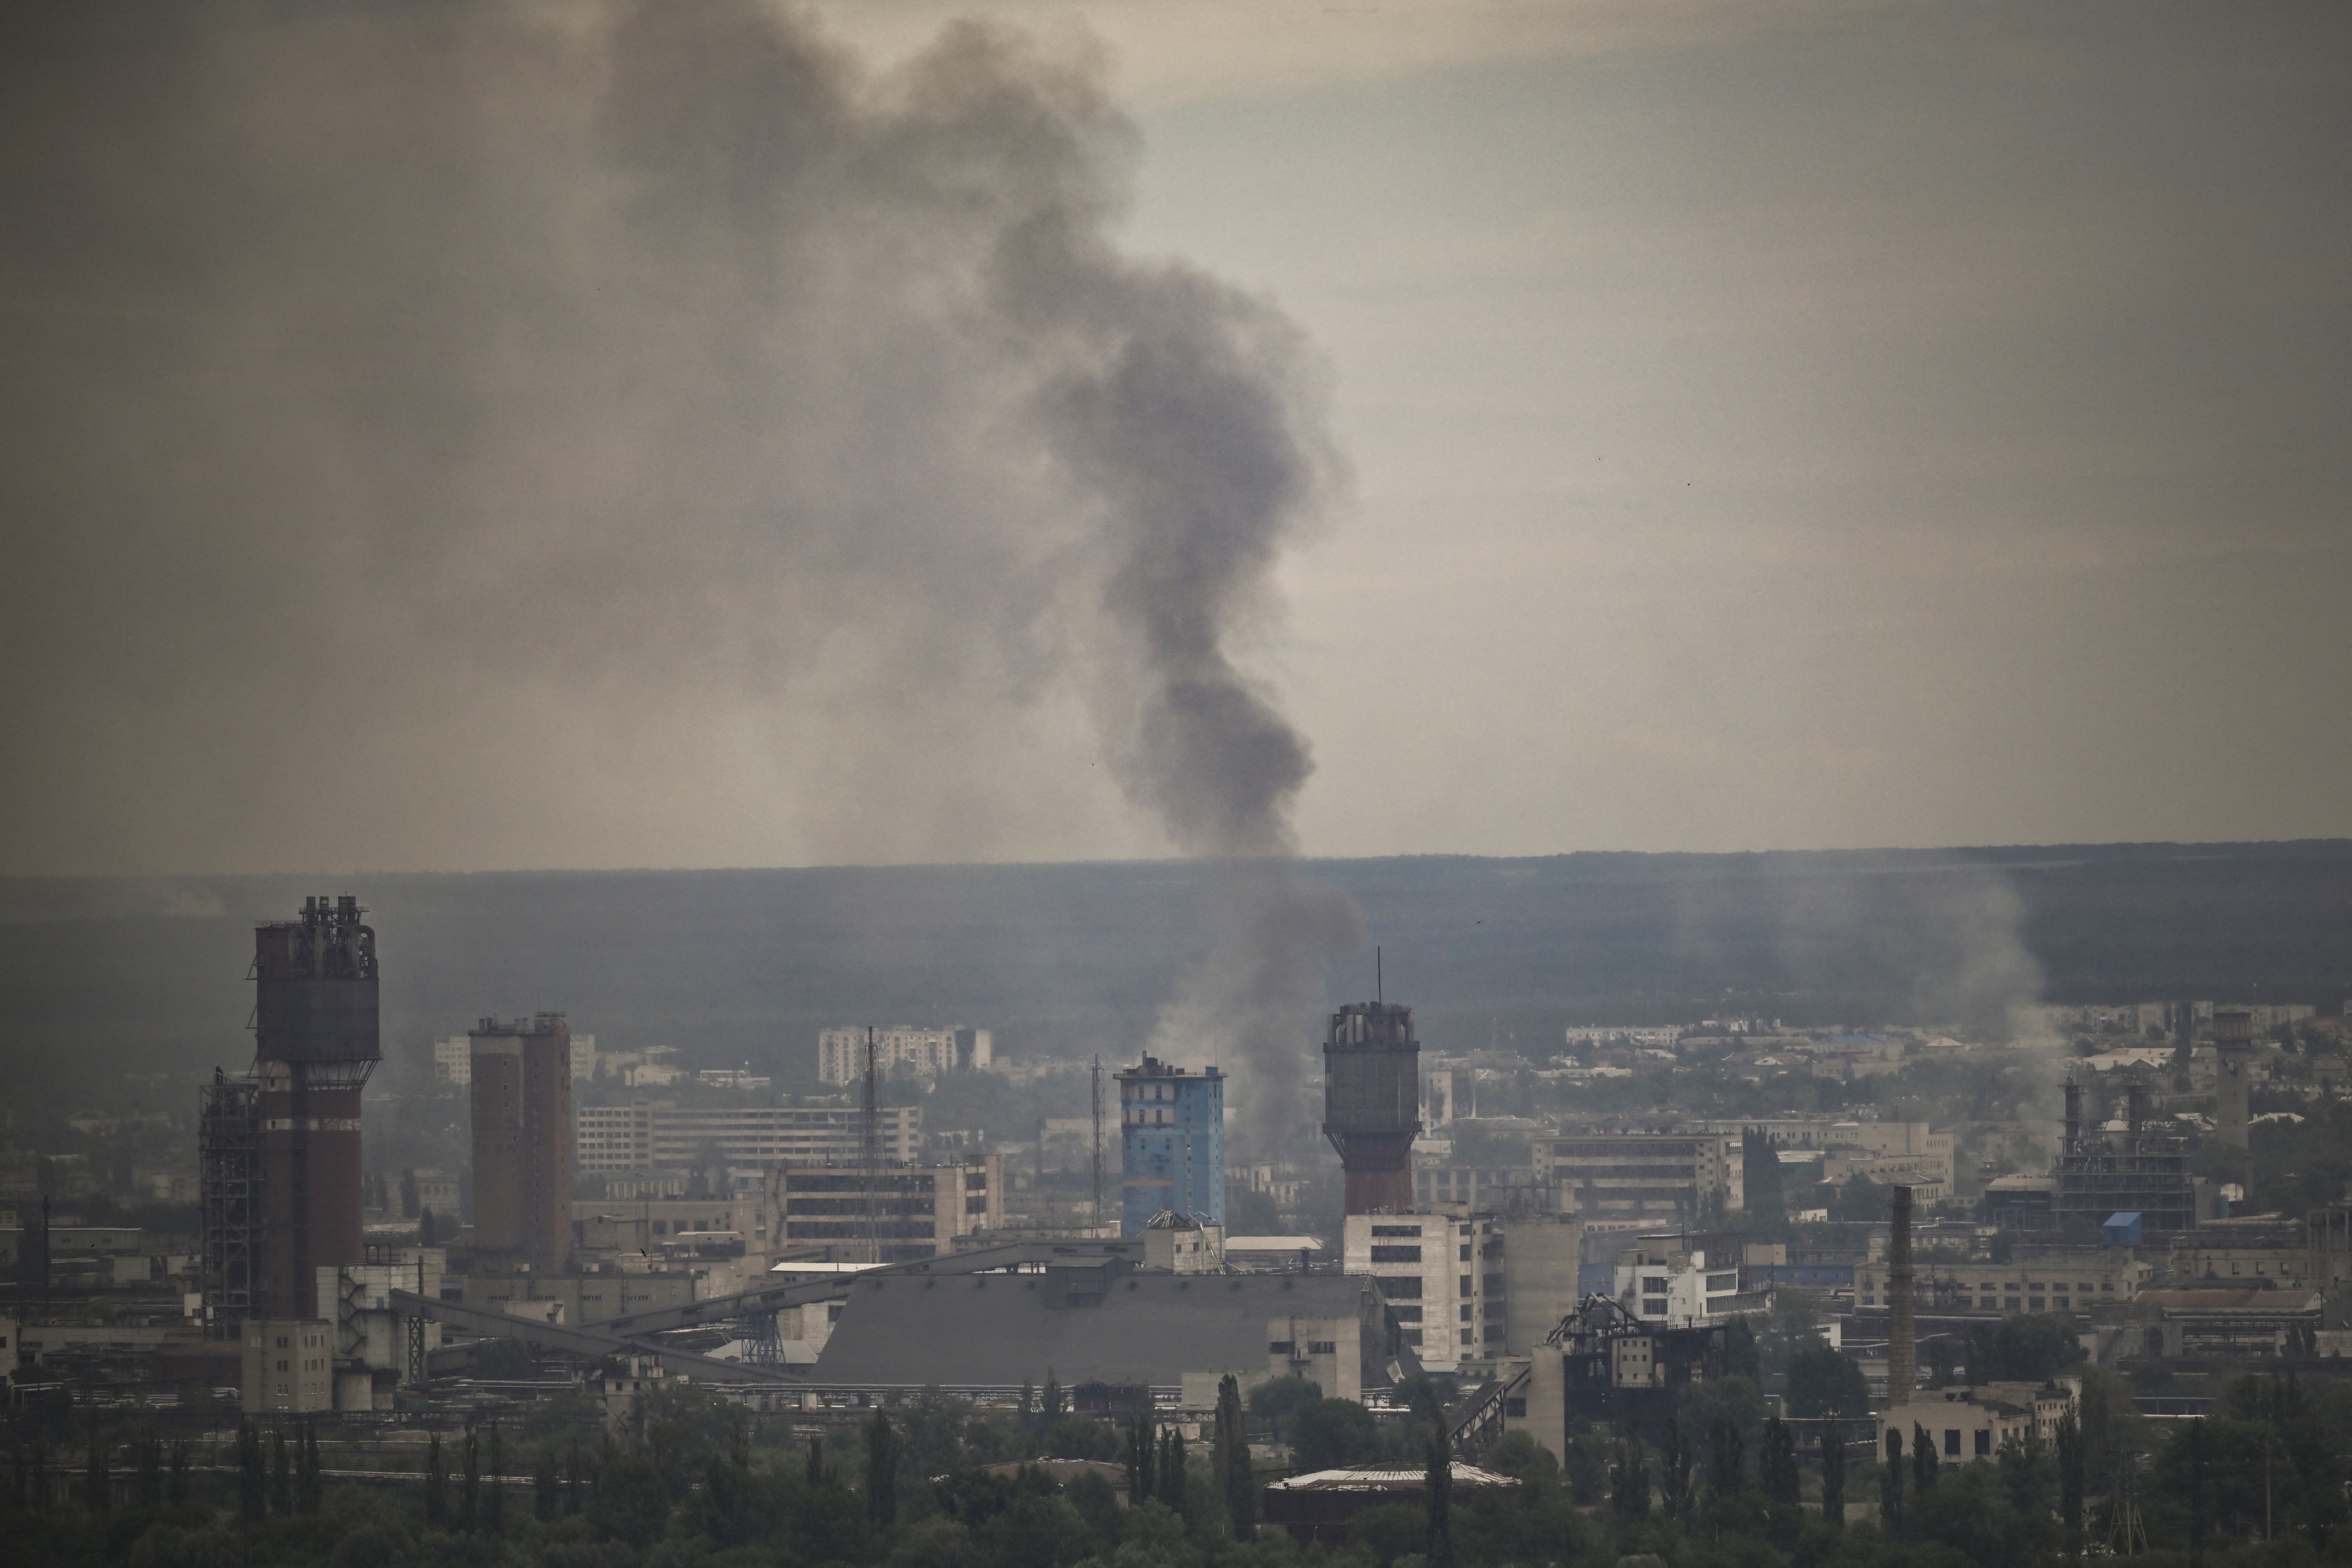 Ukrainian troops withdrawing from embattled Sievierodonetsk, fighting continues